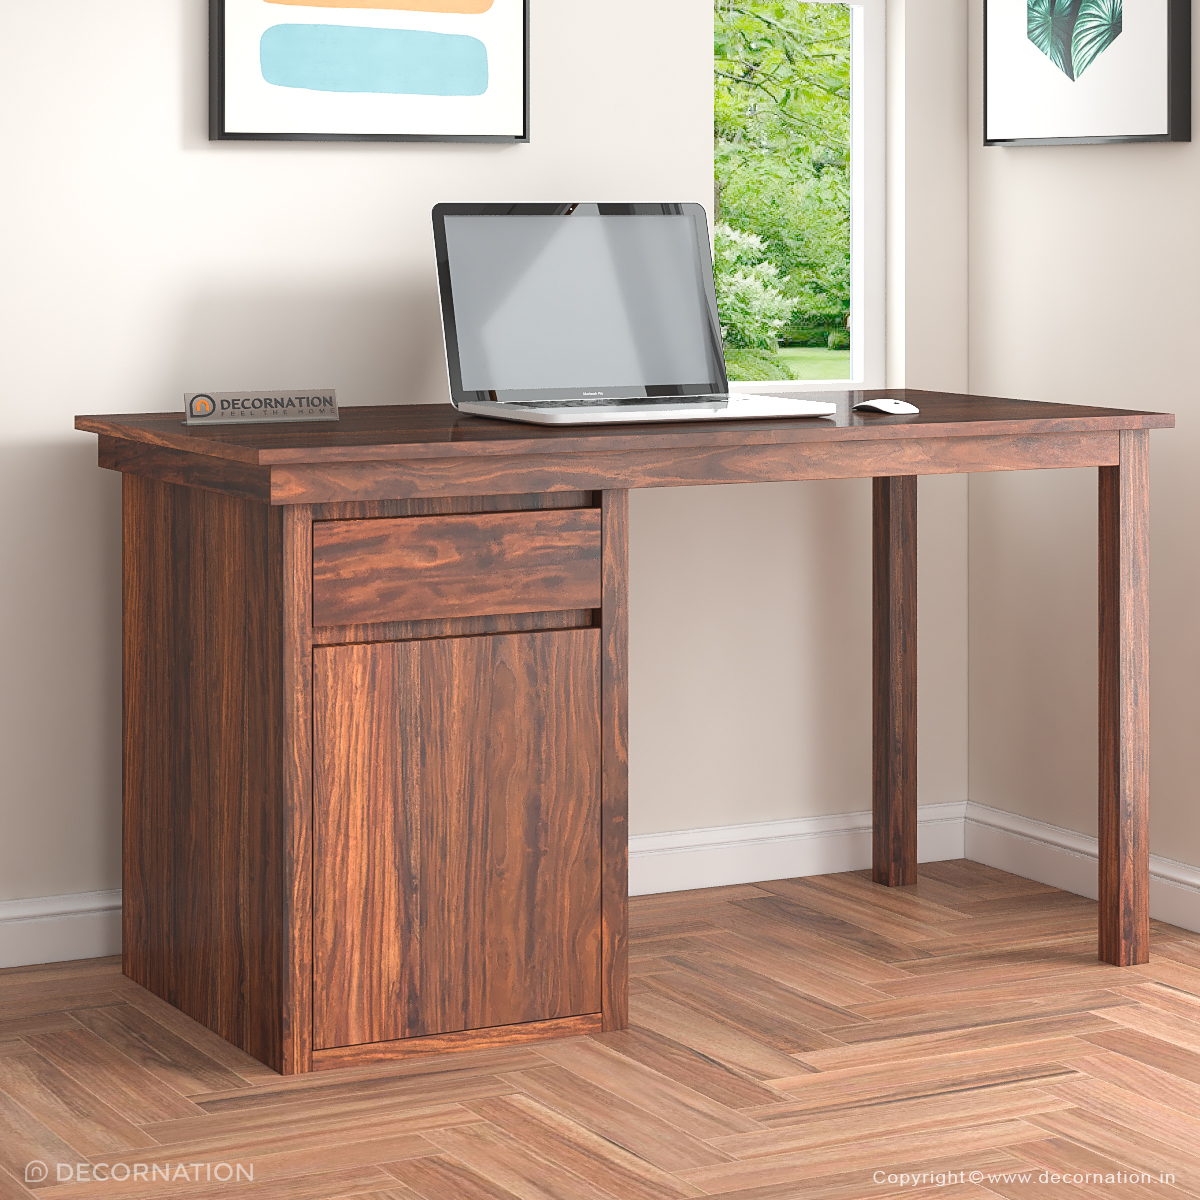 Flavia Wooden Computer Table with Storage - Decornation